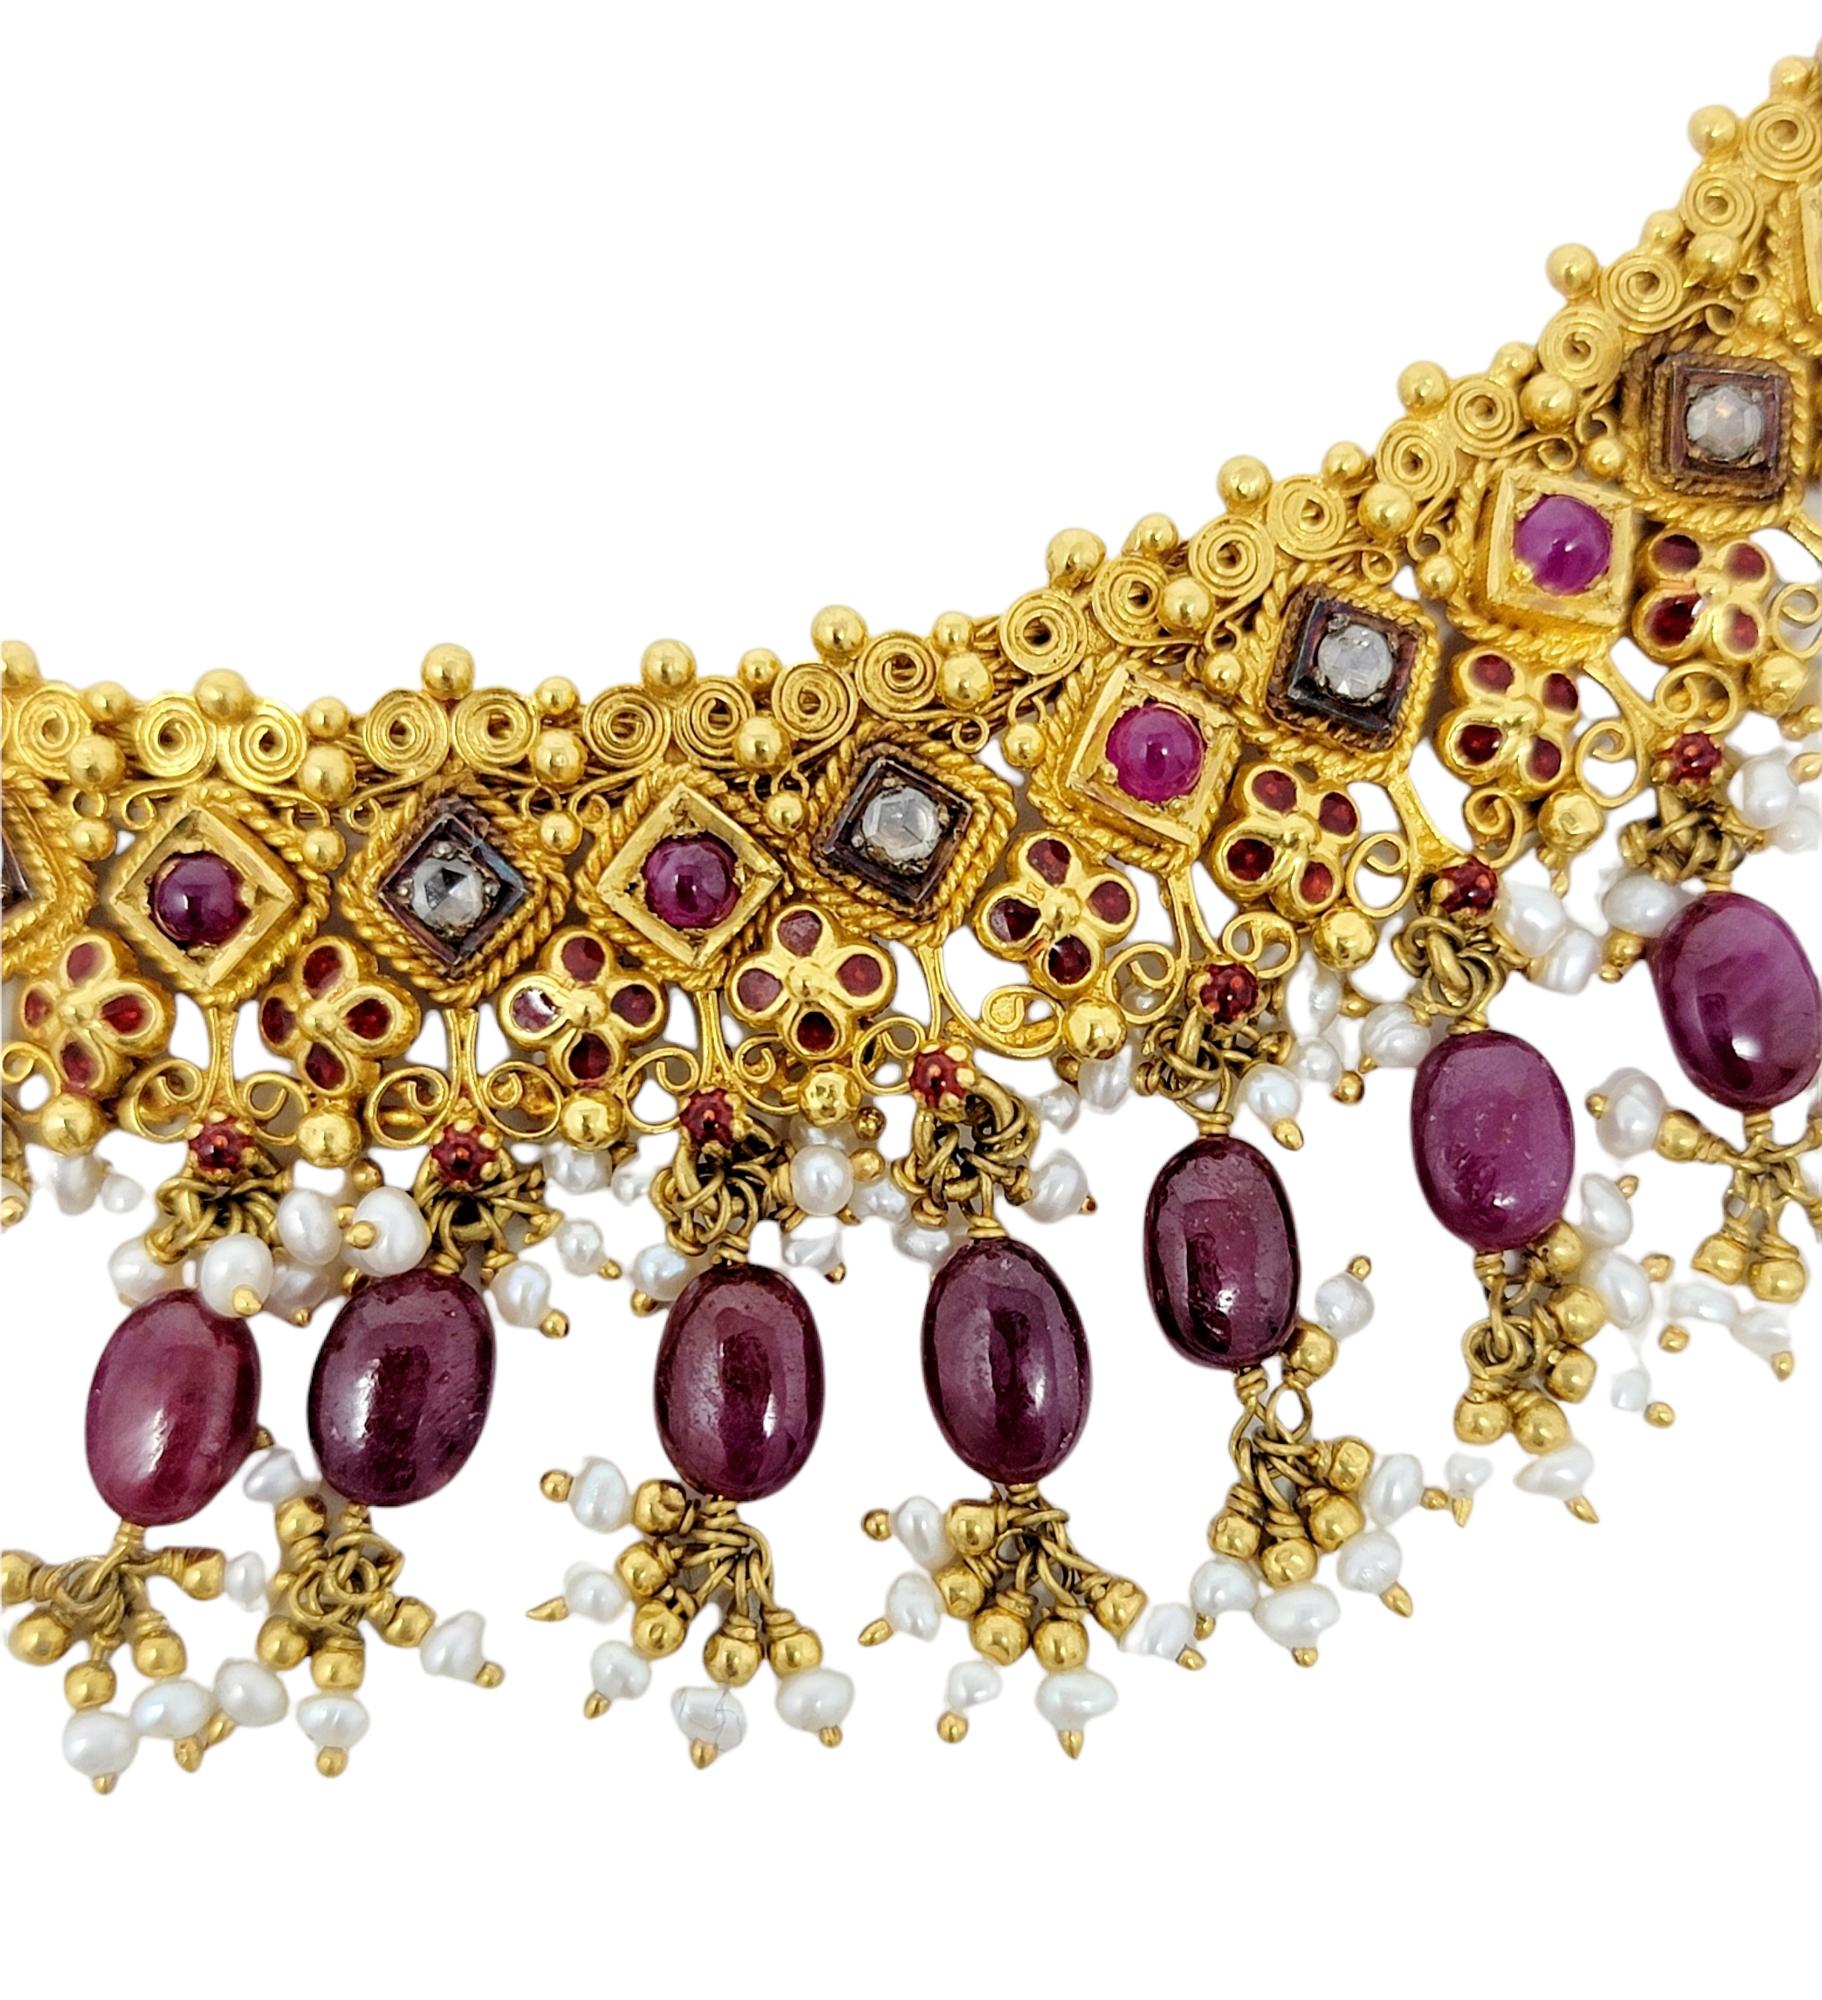 This stunning multi-colored choker necklace is an absolute work of art!  Filled with movement, color and personality, this one-of-a-kind necklace will absolutely radiate on the neck. The luxurious 22 karat yellow gold piece is embellished with